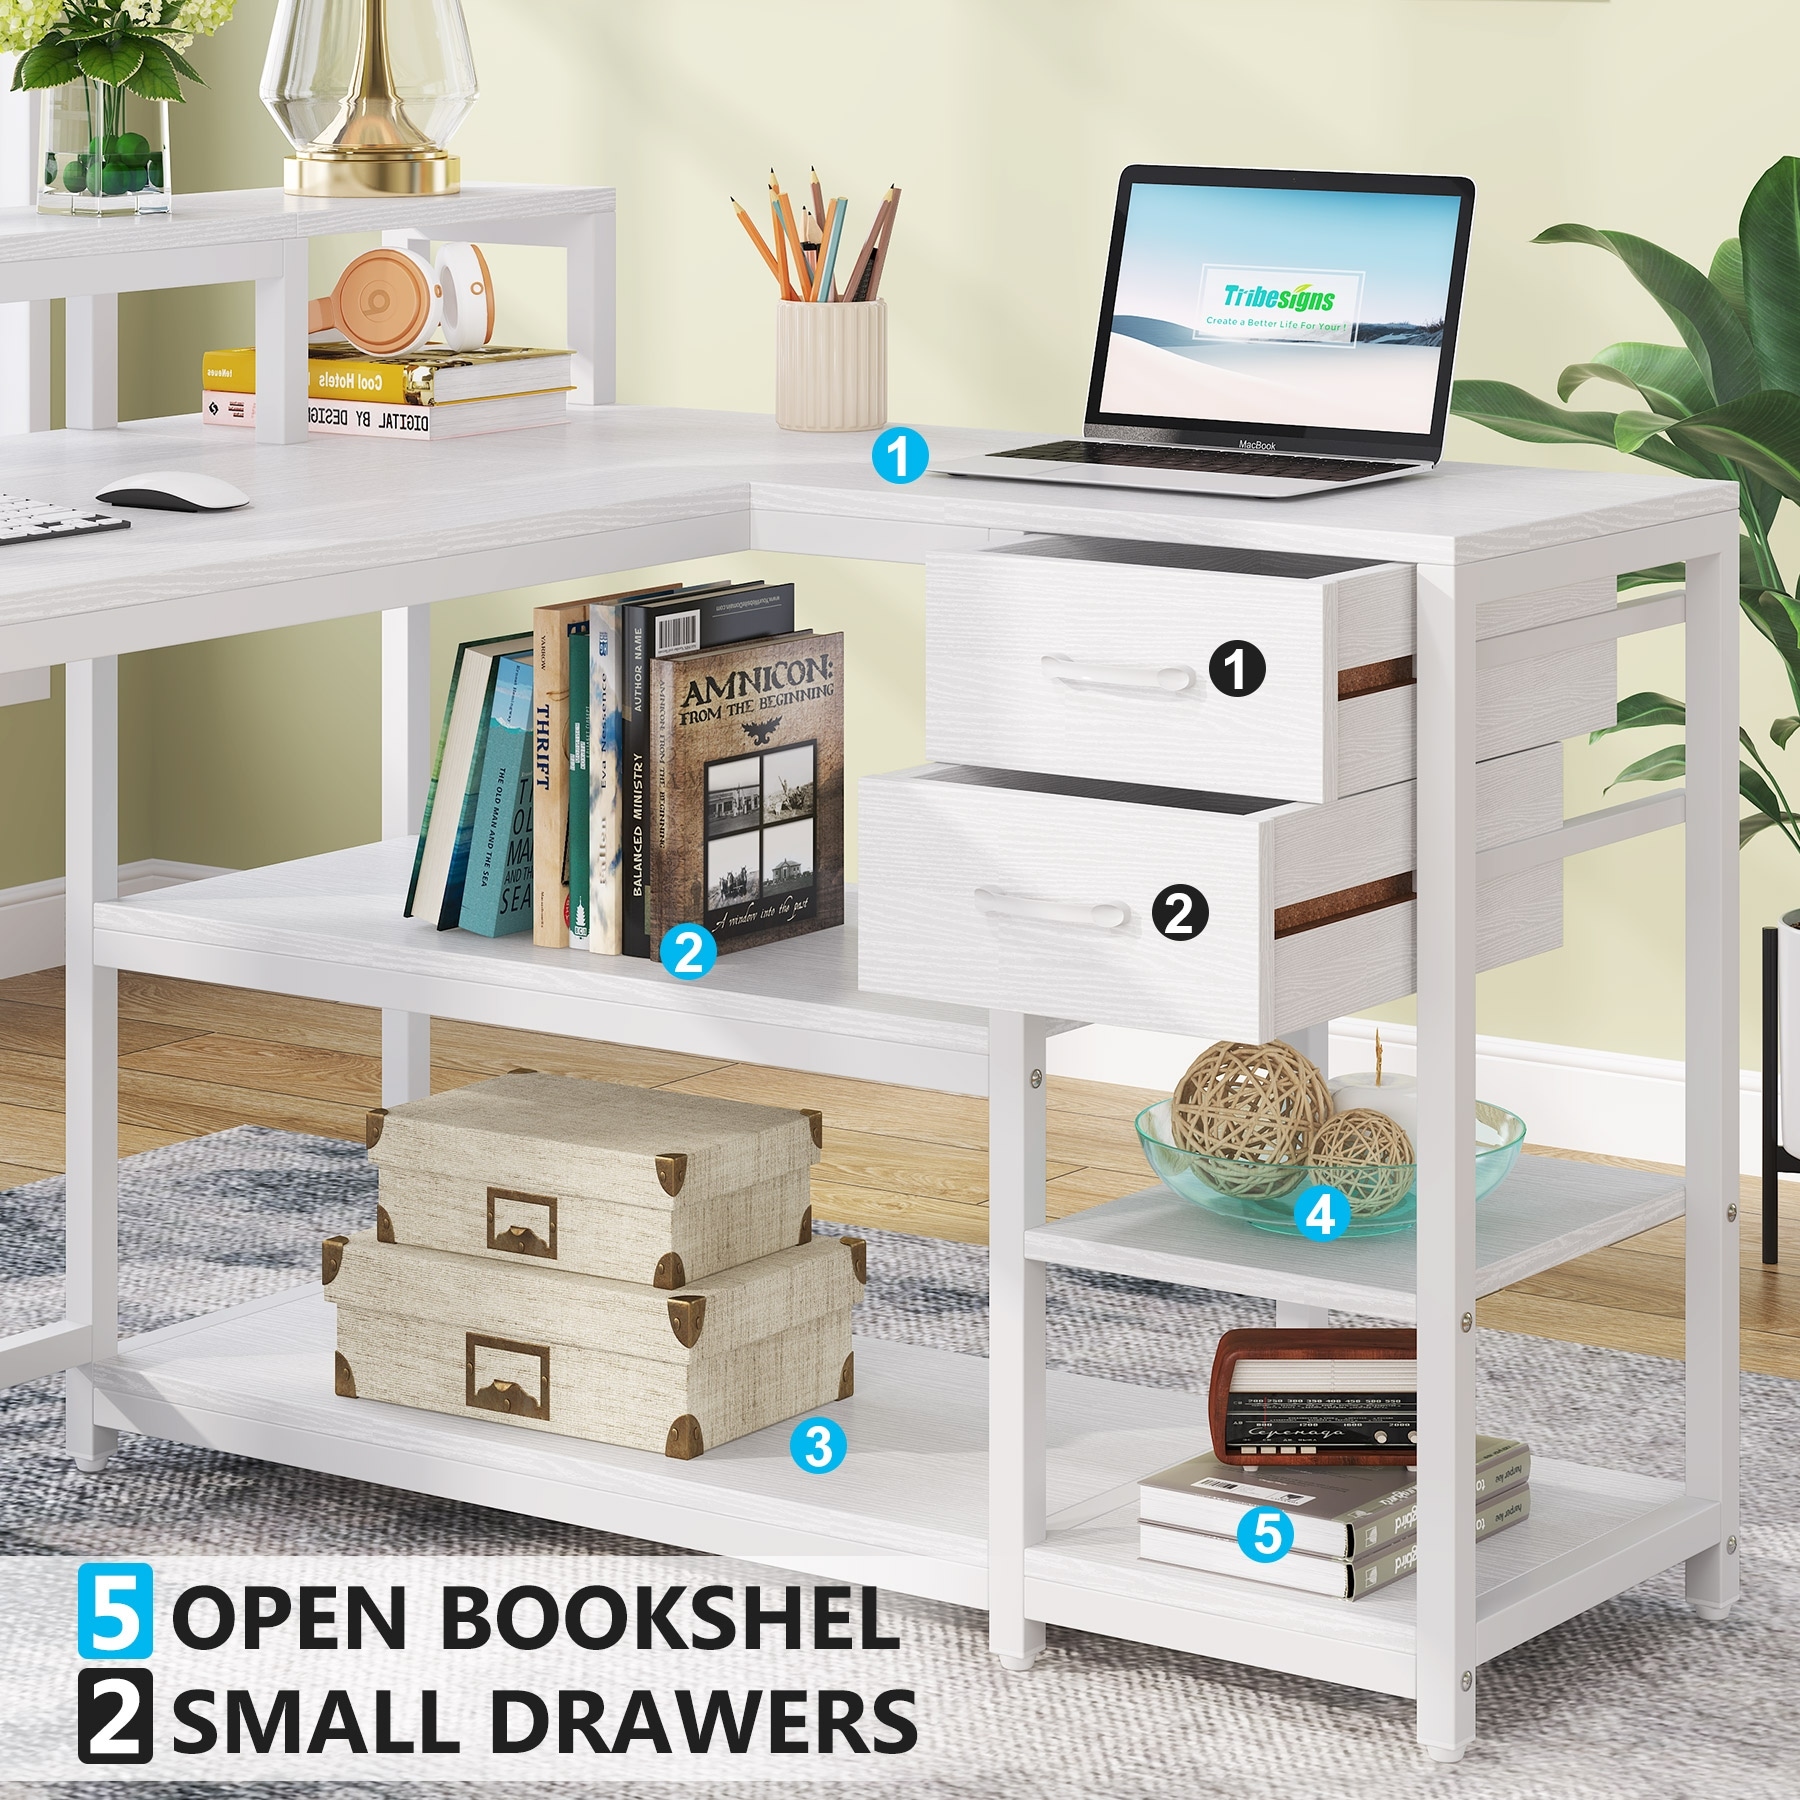 https://ak1.ostkcdn.com/images/products/is/images/direct/502a548bf4fcbc255cc39f24aaffc4c8c8e1d88a/L-Shaped-Desk-with-Drawer%2C-Home-Office-Corner-Desk-with-Storage-Shelves-and-Monitor-Stand%2C-Rustic-PC-Desk-for-Small-Space.jpg